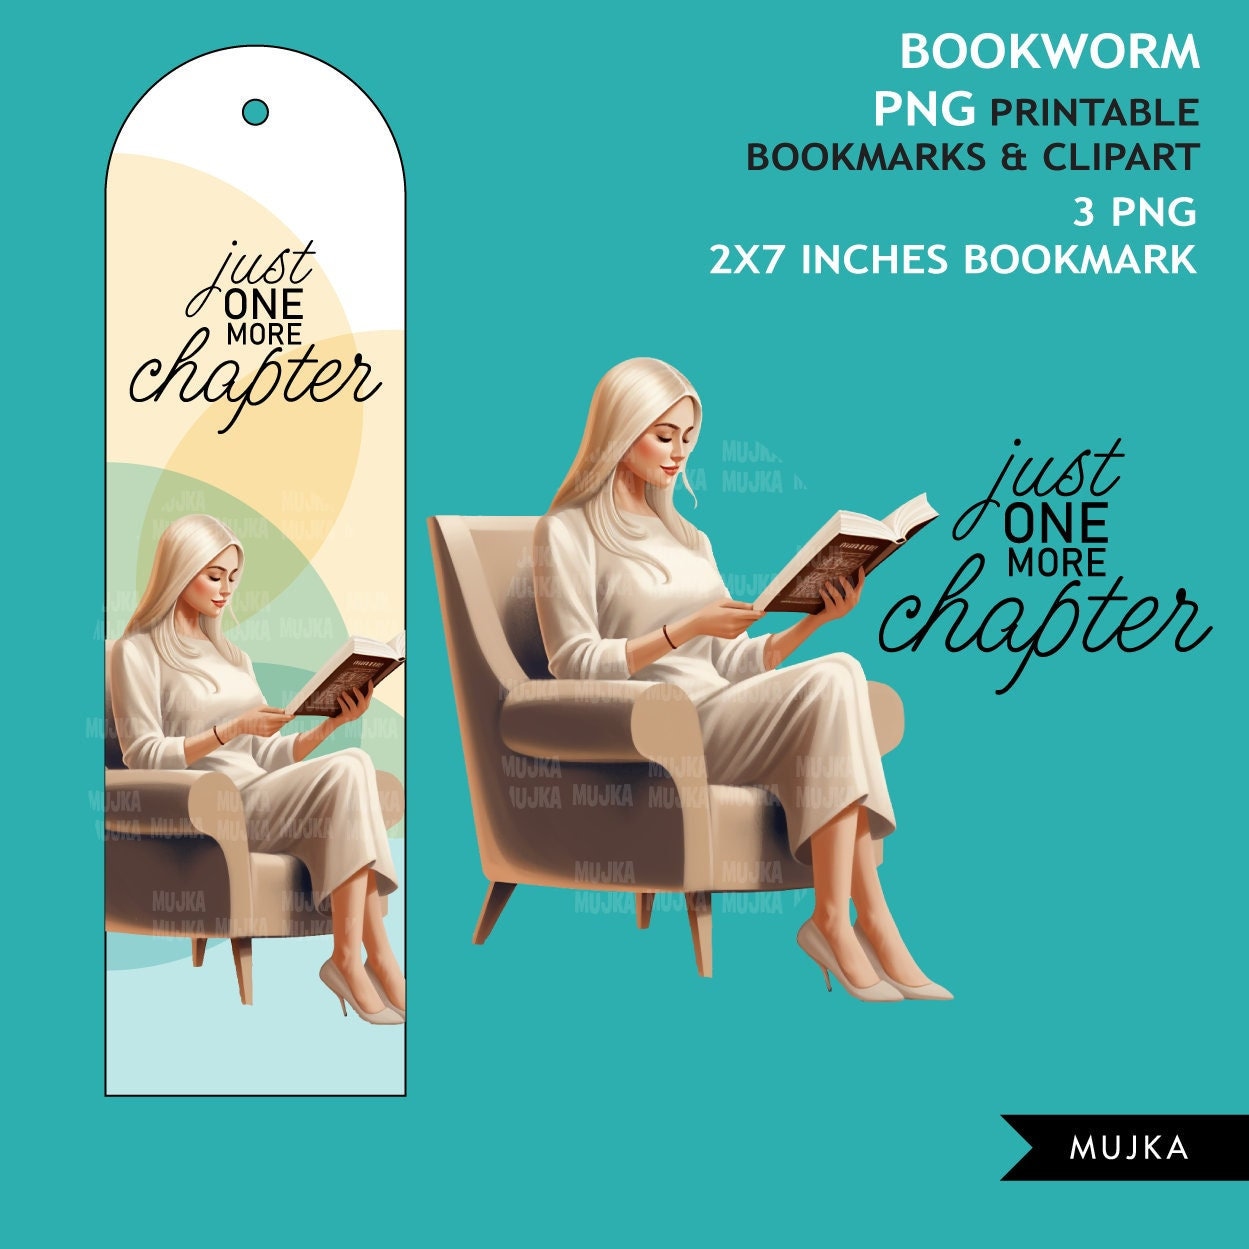 Bookworm png, Printable Bookmarks, Blonde woman reading png, Bookworm clipart, reading clipart, self care woman png, reading girl stickers